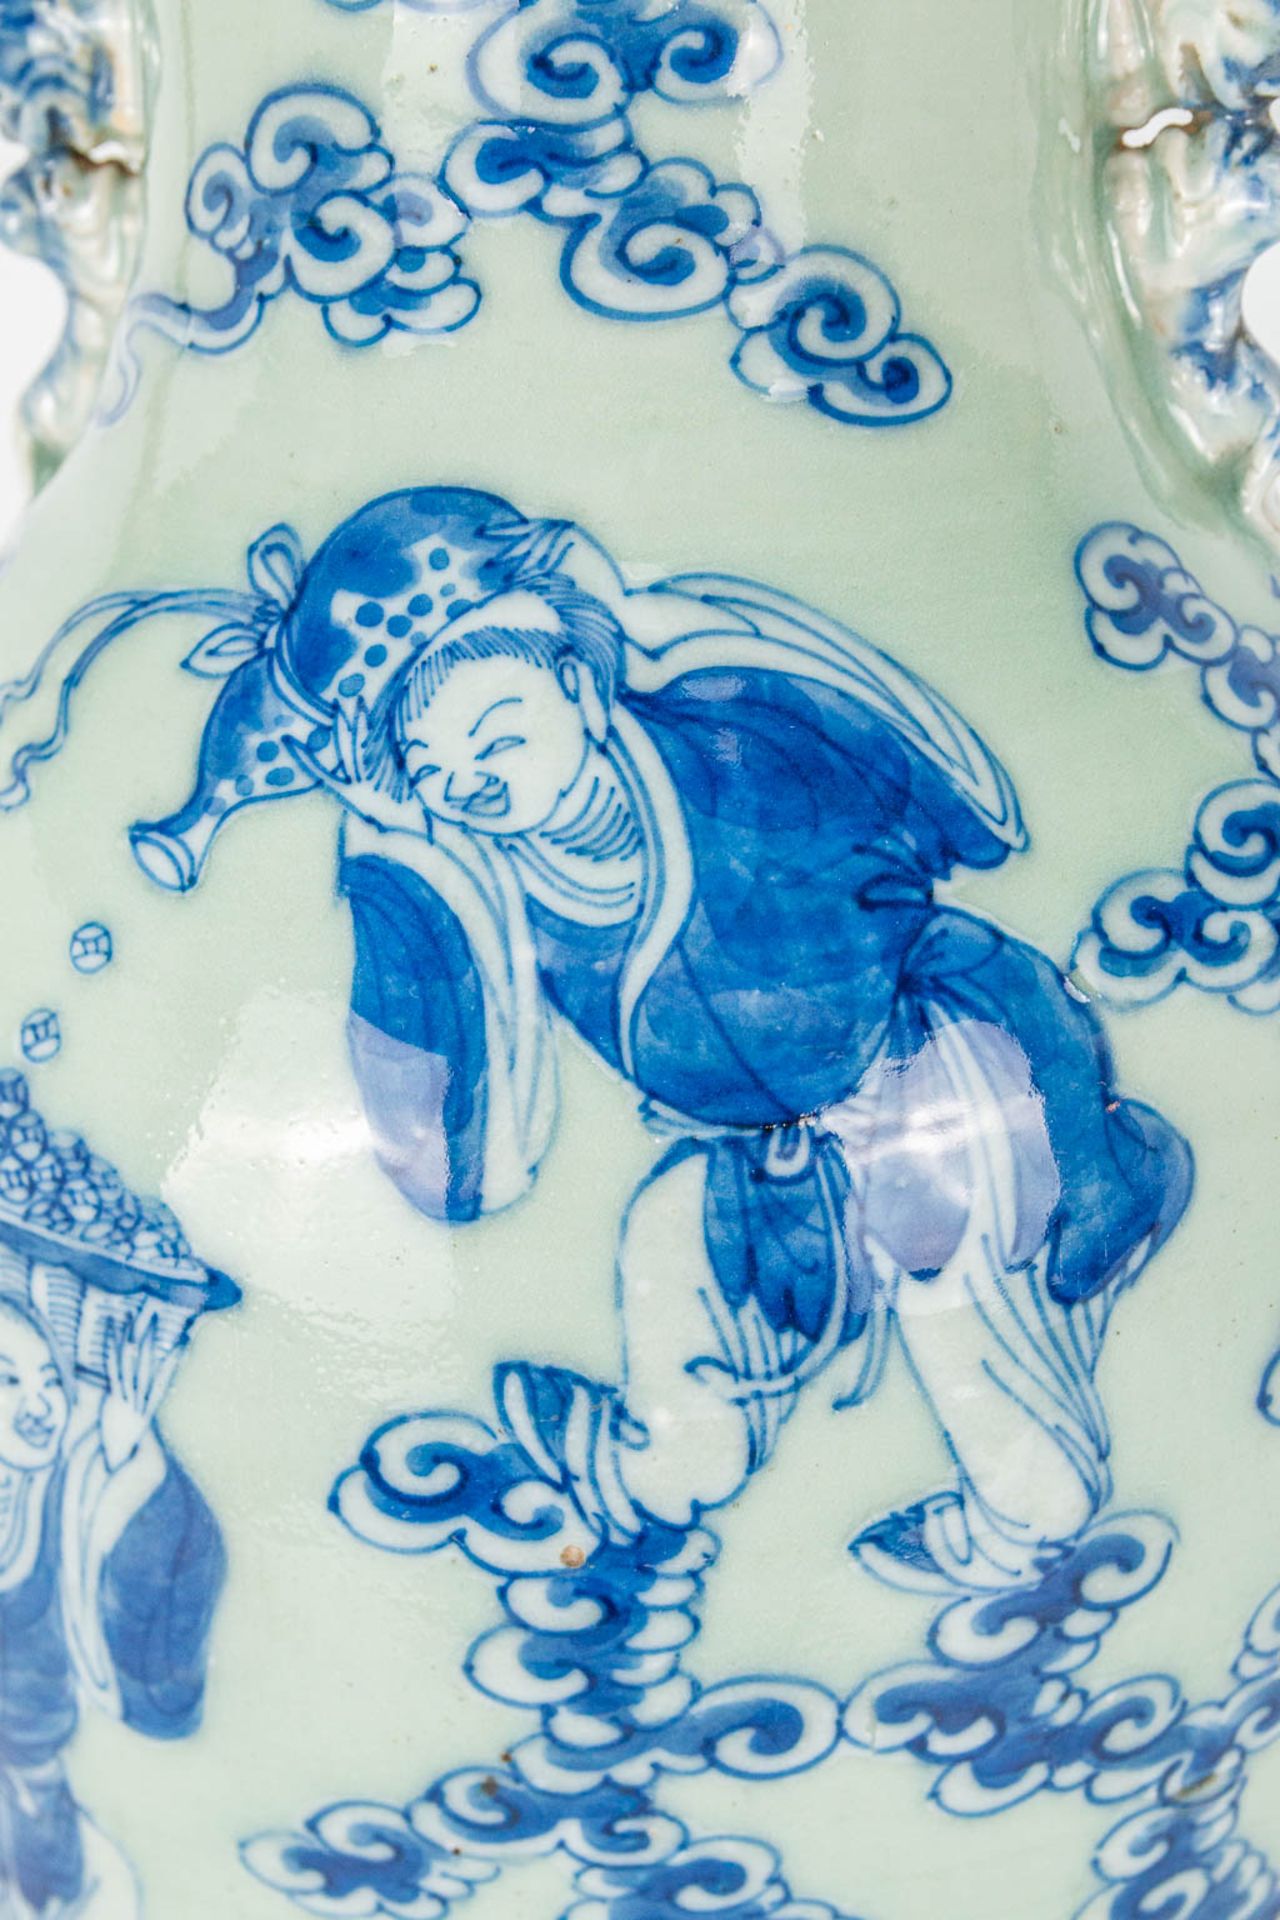 A vase made of Chinese porcelain with a blue-white decor. 19th/20th century. - Image 10 of 14